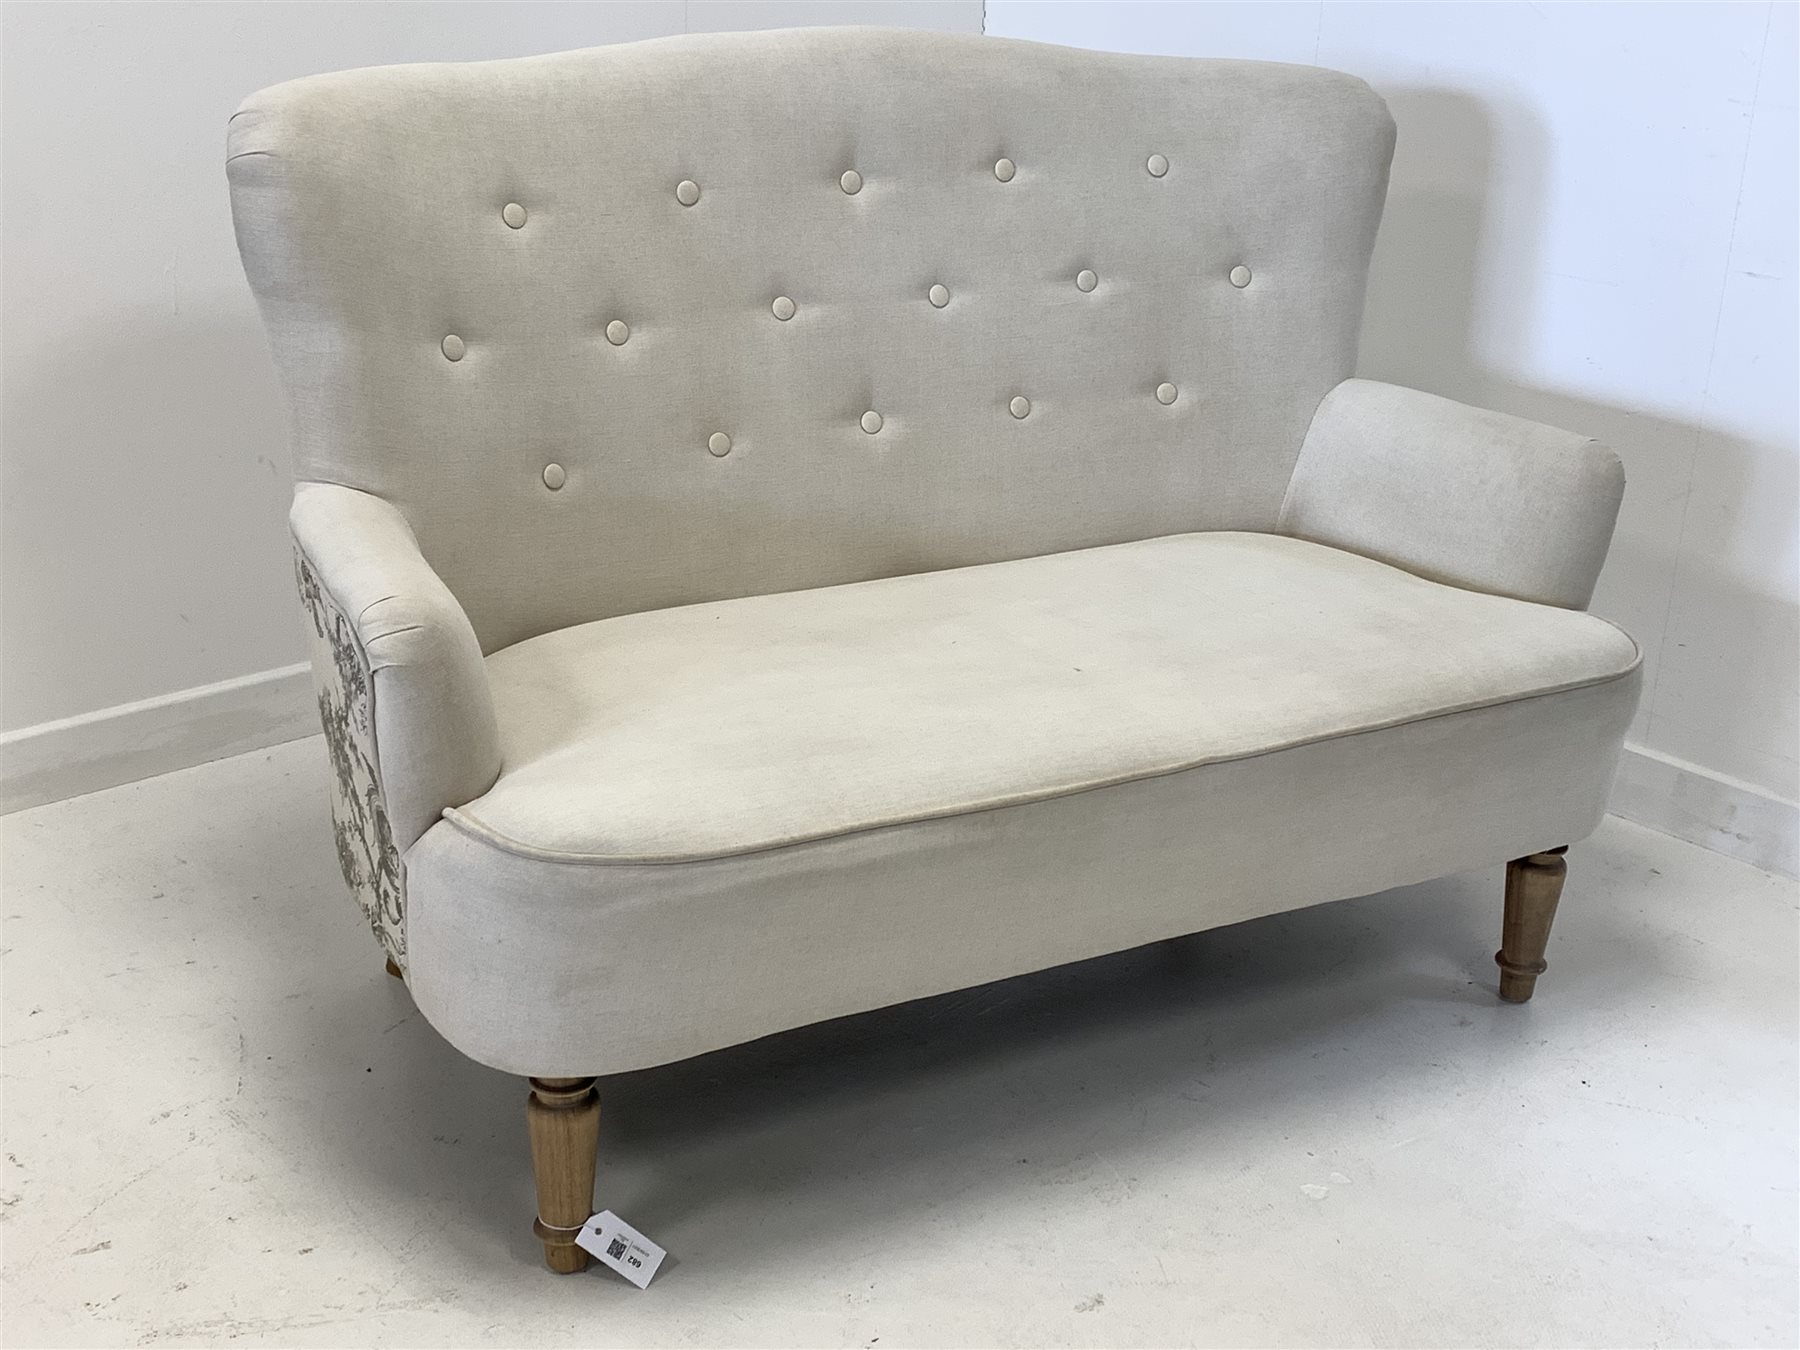 Traditional 'Loveseat' two seat sofa, upholstered in oatmeal buttoned linen, with feature toile fabr - Image 2 of 3